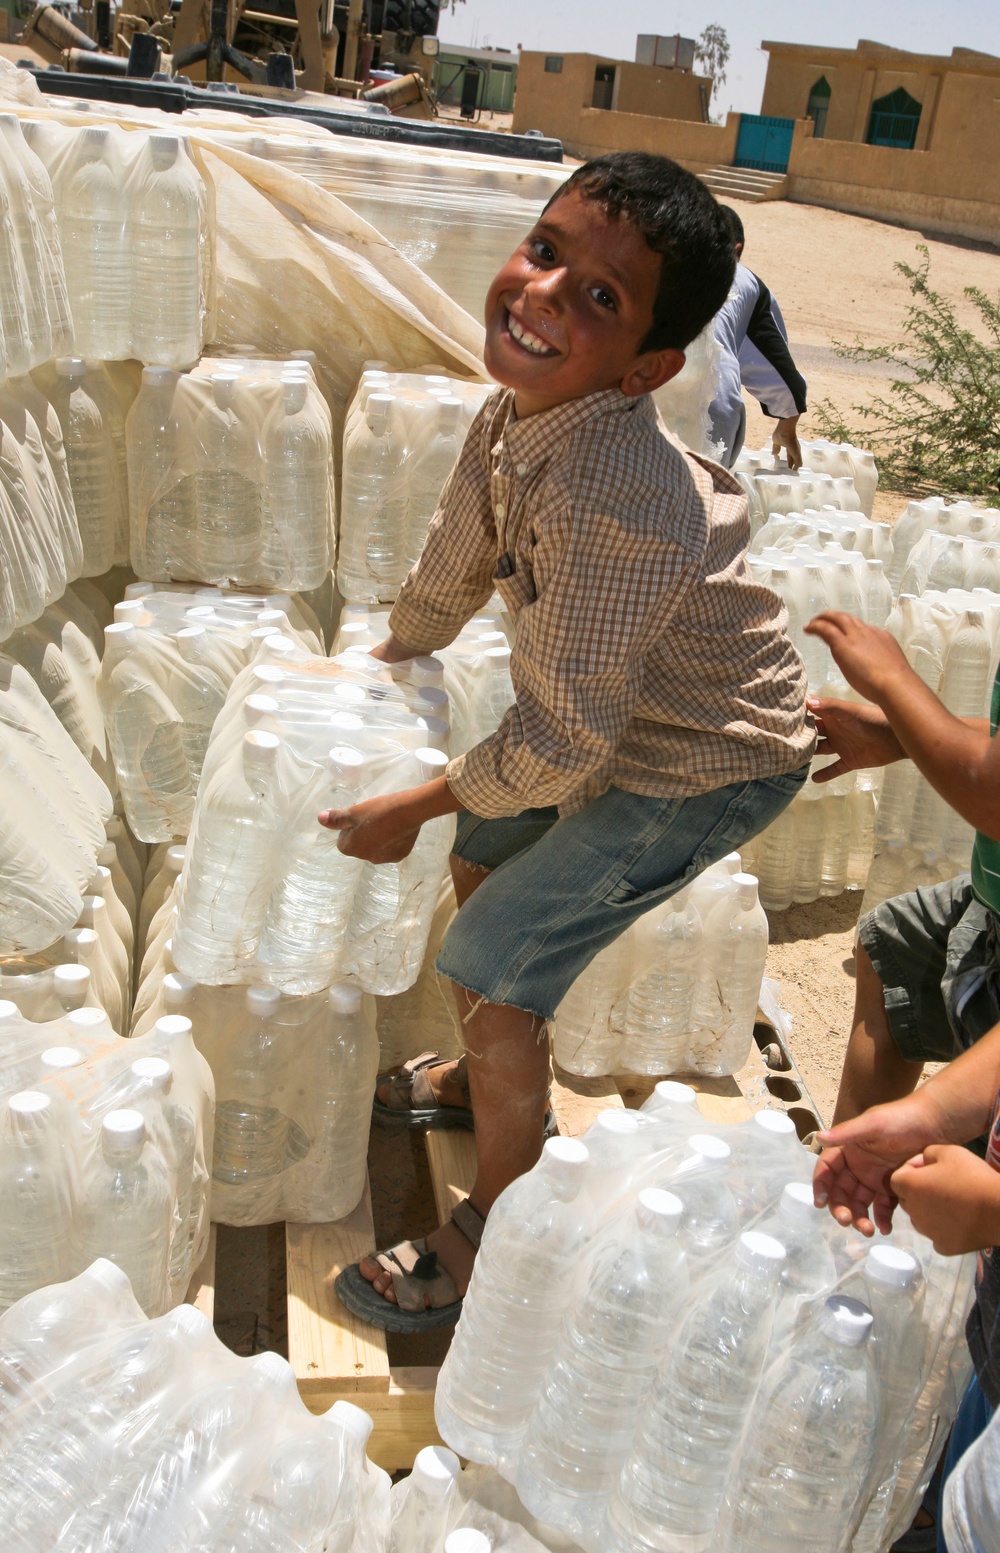 Iraqi Boys Help Move Bottled Water During Women's Engagement